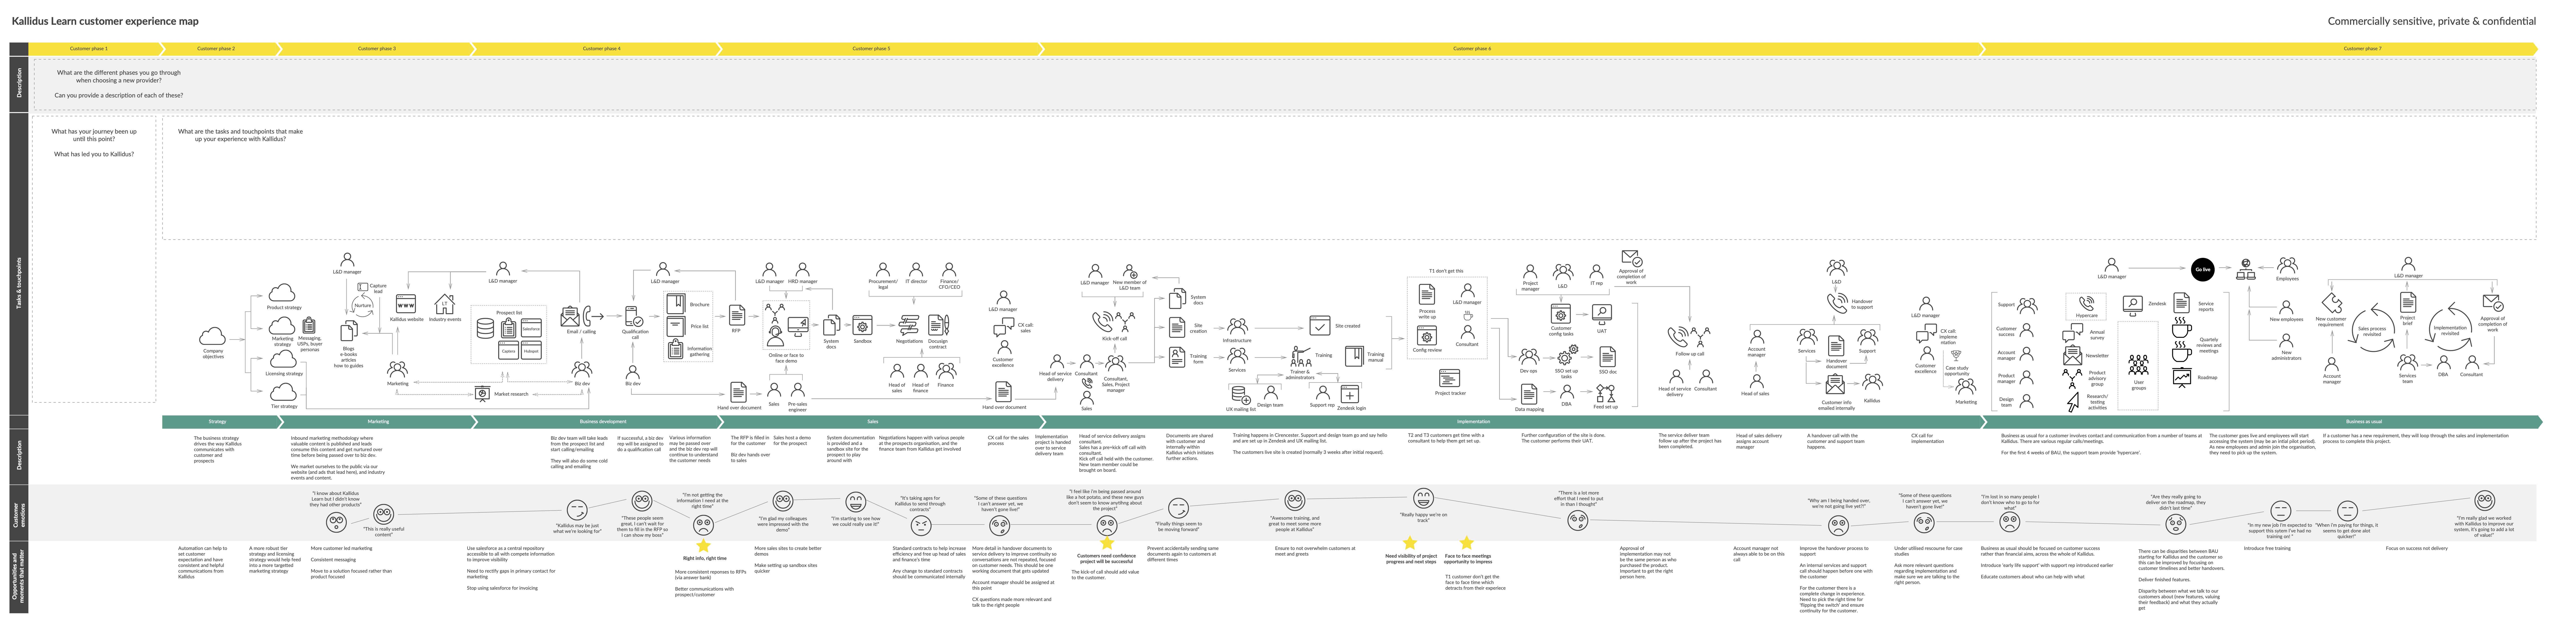 Current customer journey map